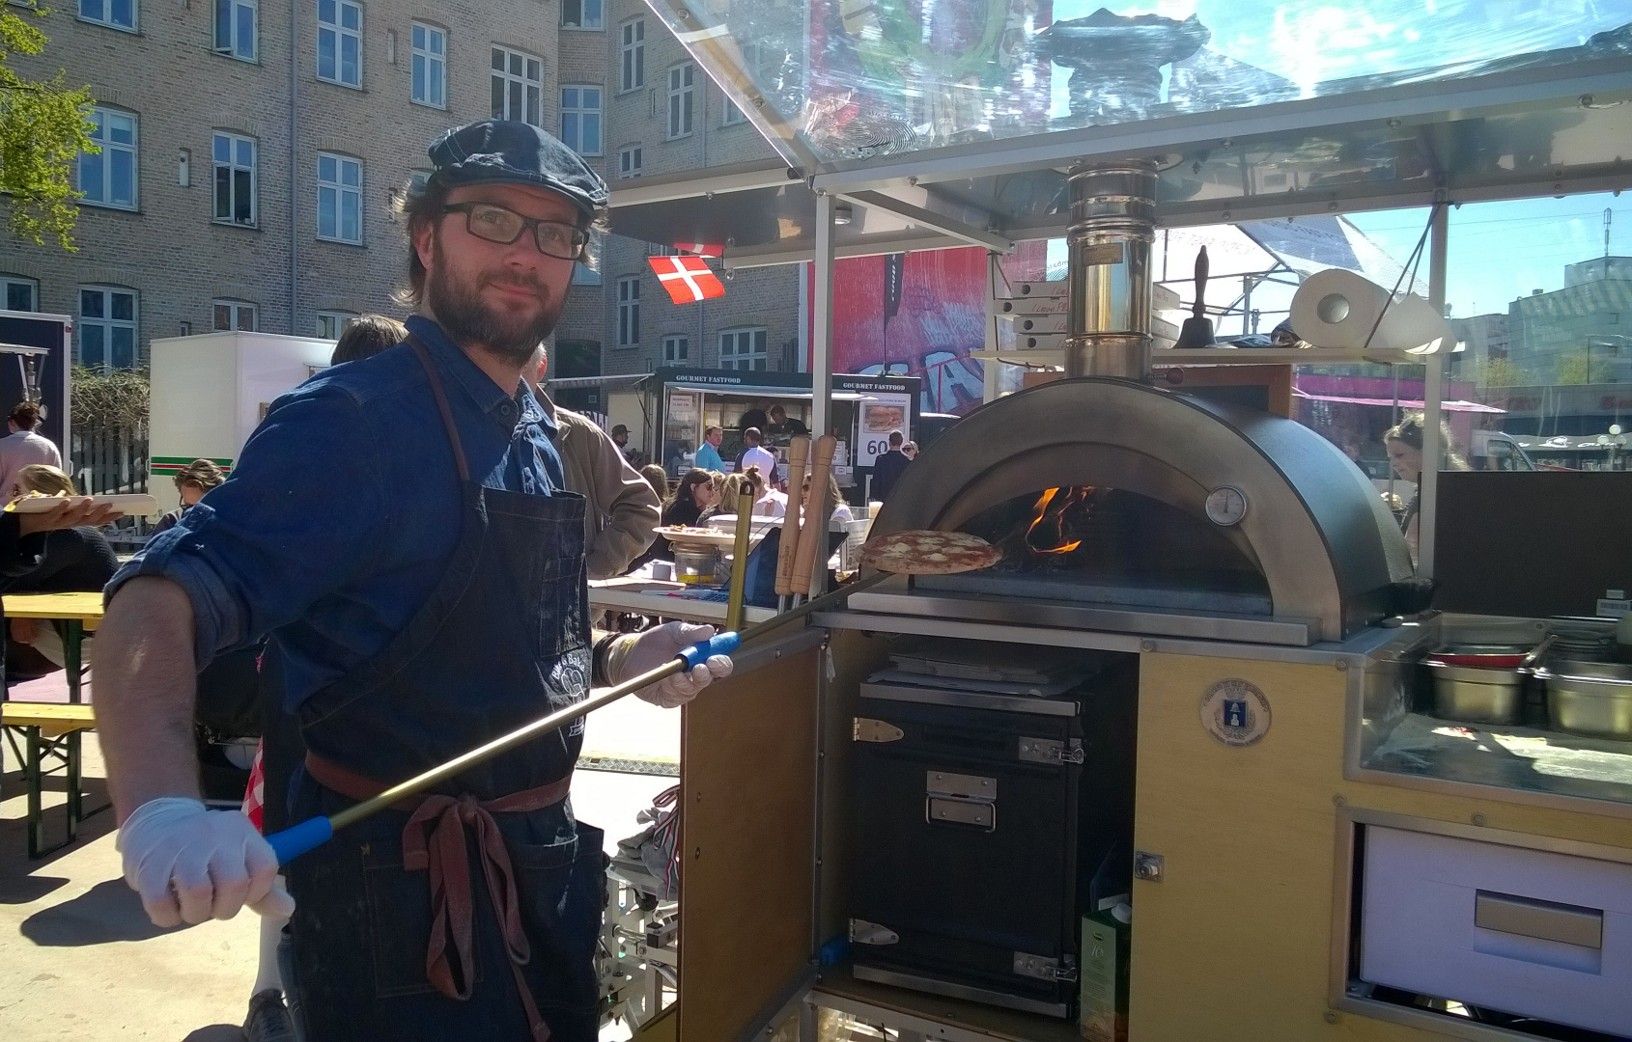 Pizza on wheels: Bikes, breaks, bakes – a delivery like no other